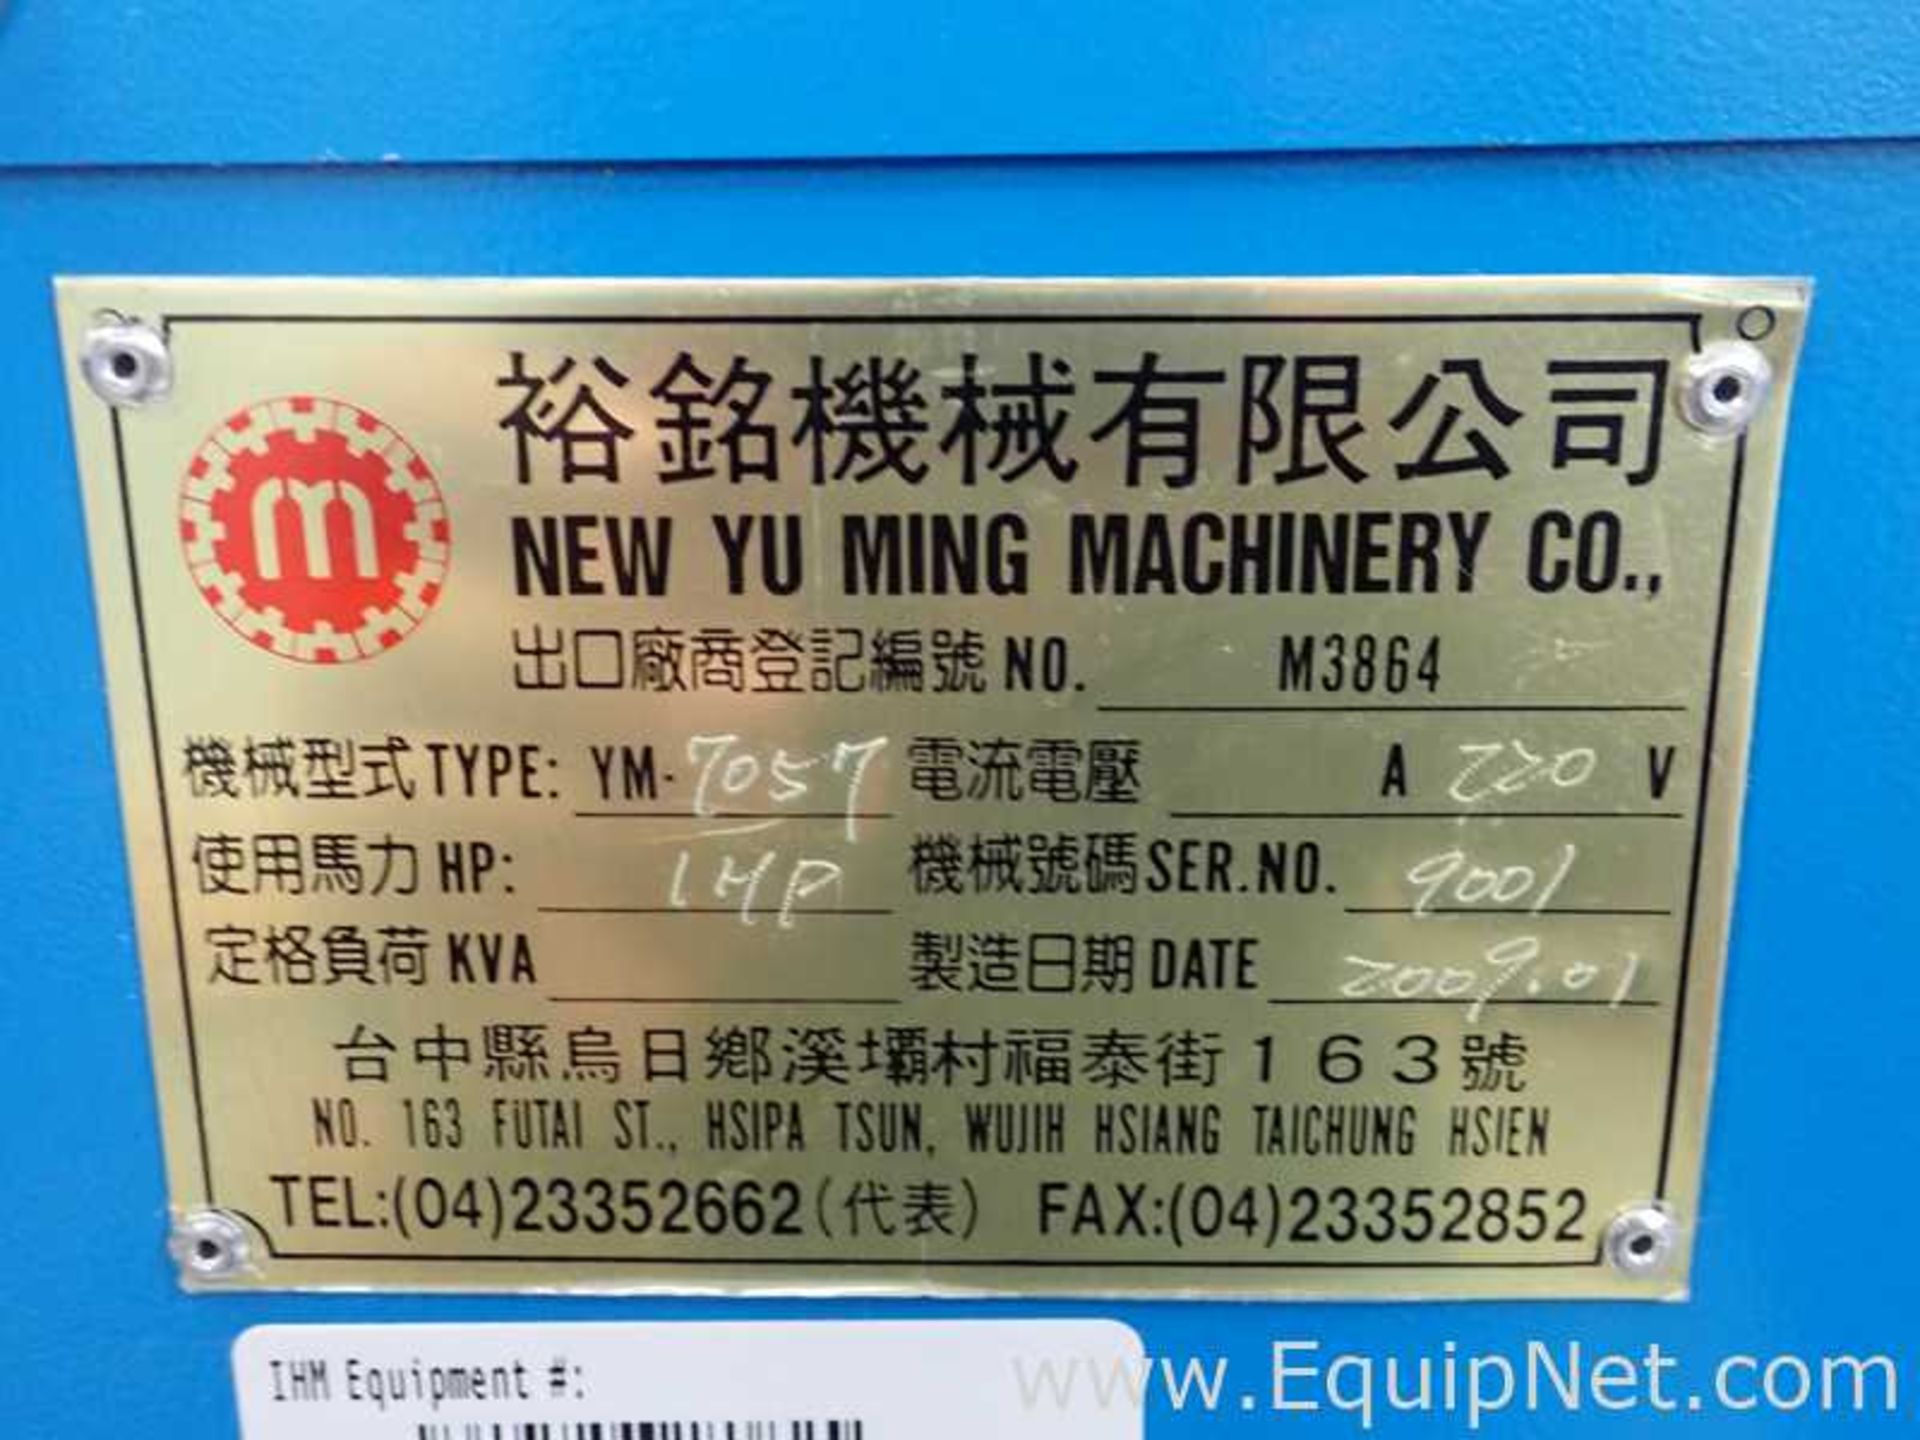 EQUIPNET LISTING #762342; REMOVAL COST: $40; MODEL: YM-7057; DESCRIPTION: New Yu Ming Machinery - Image 12 of 12